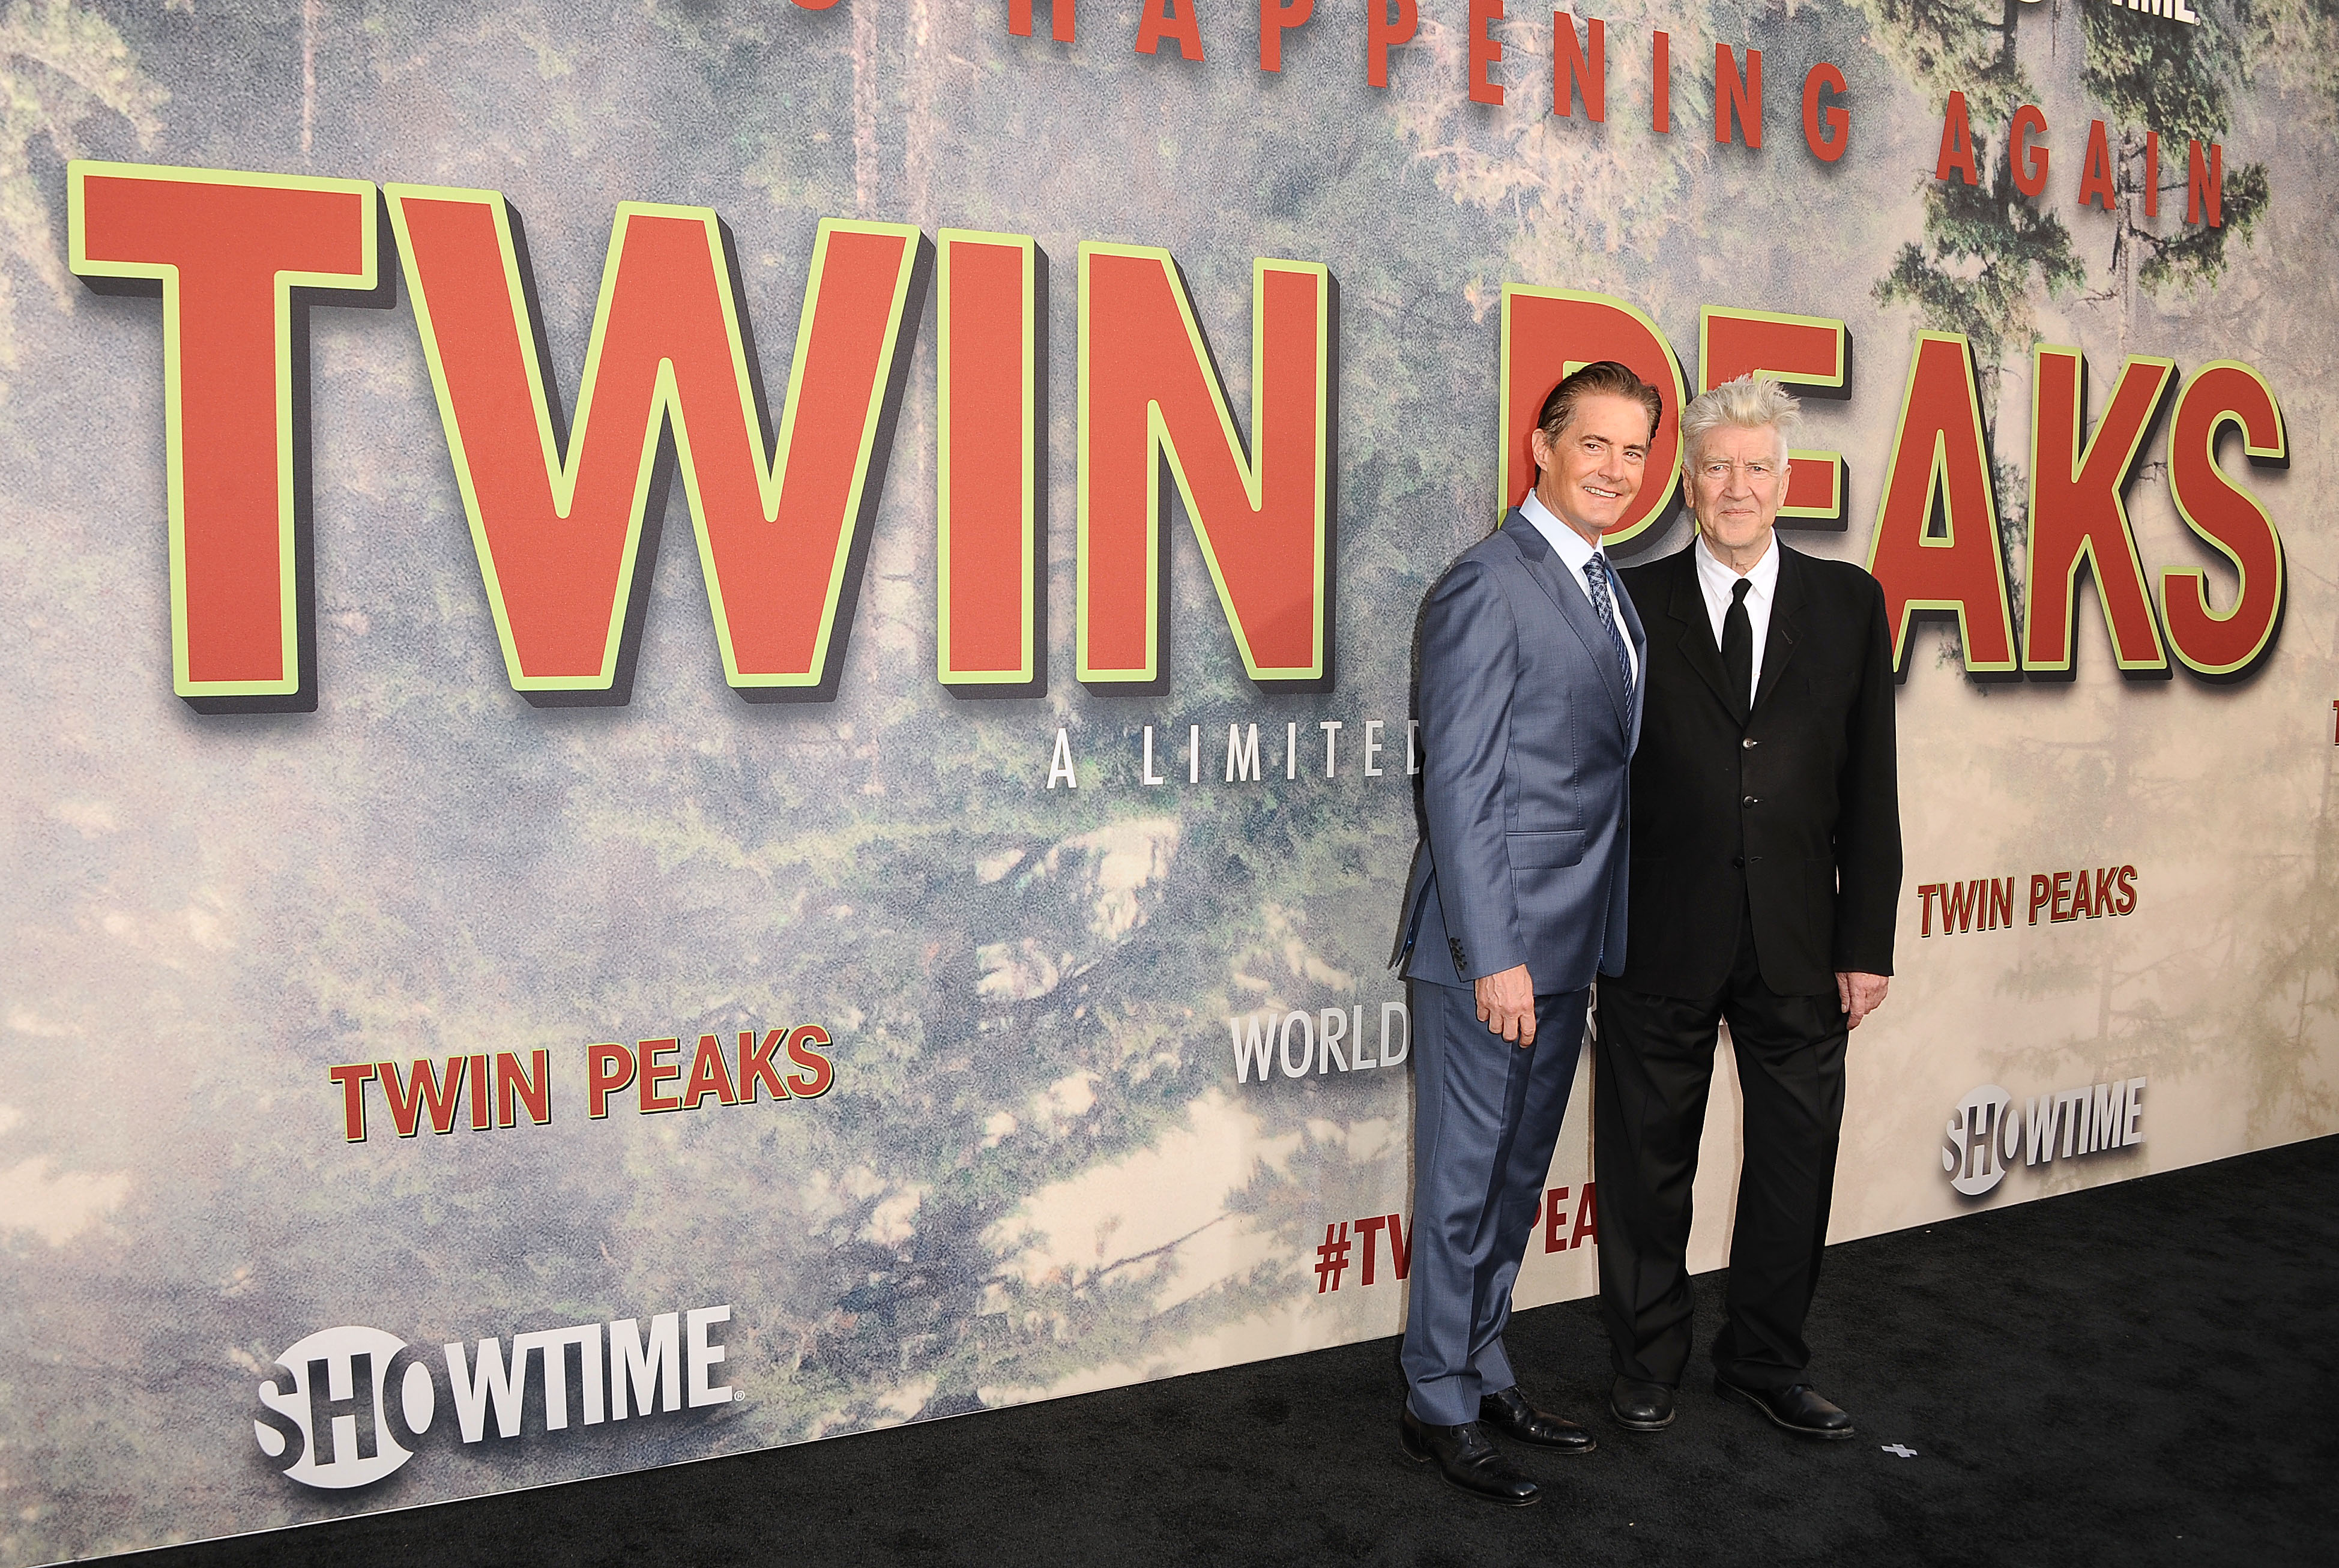 Kyle MacLachlan and David Lynch attend the premiere of "Twin Peaks: The Return."